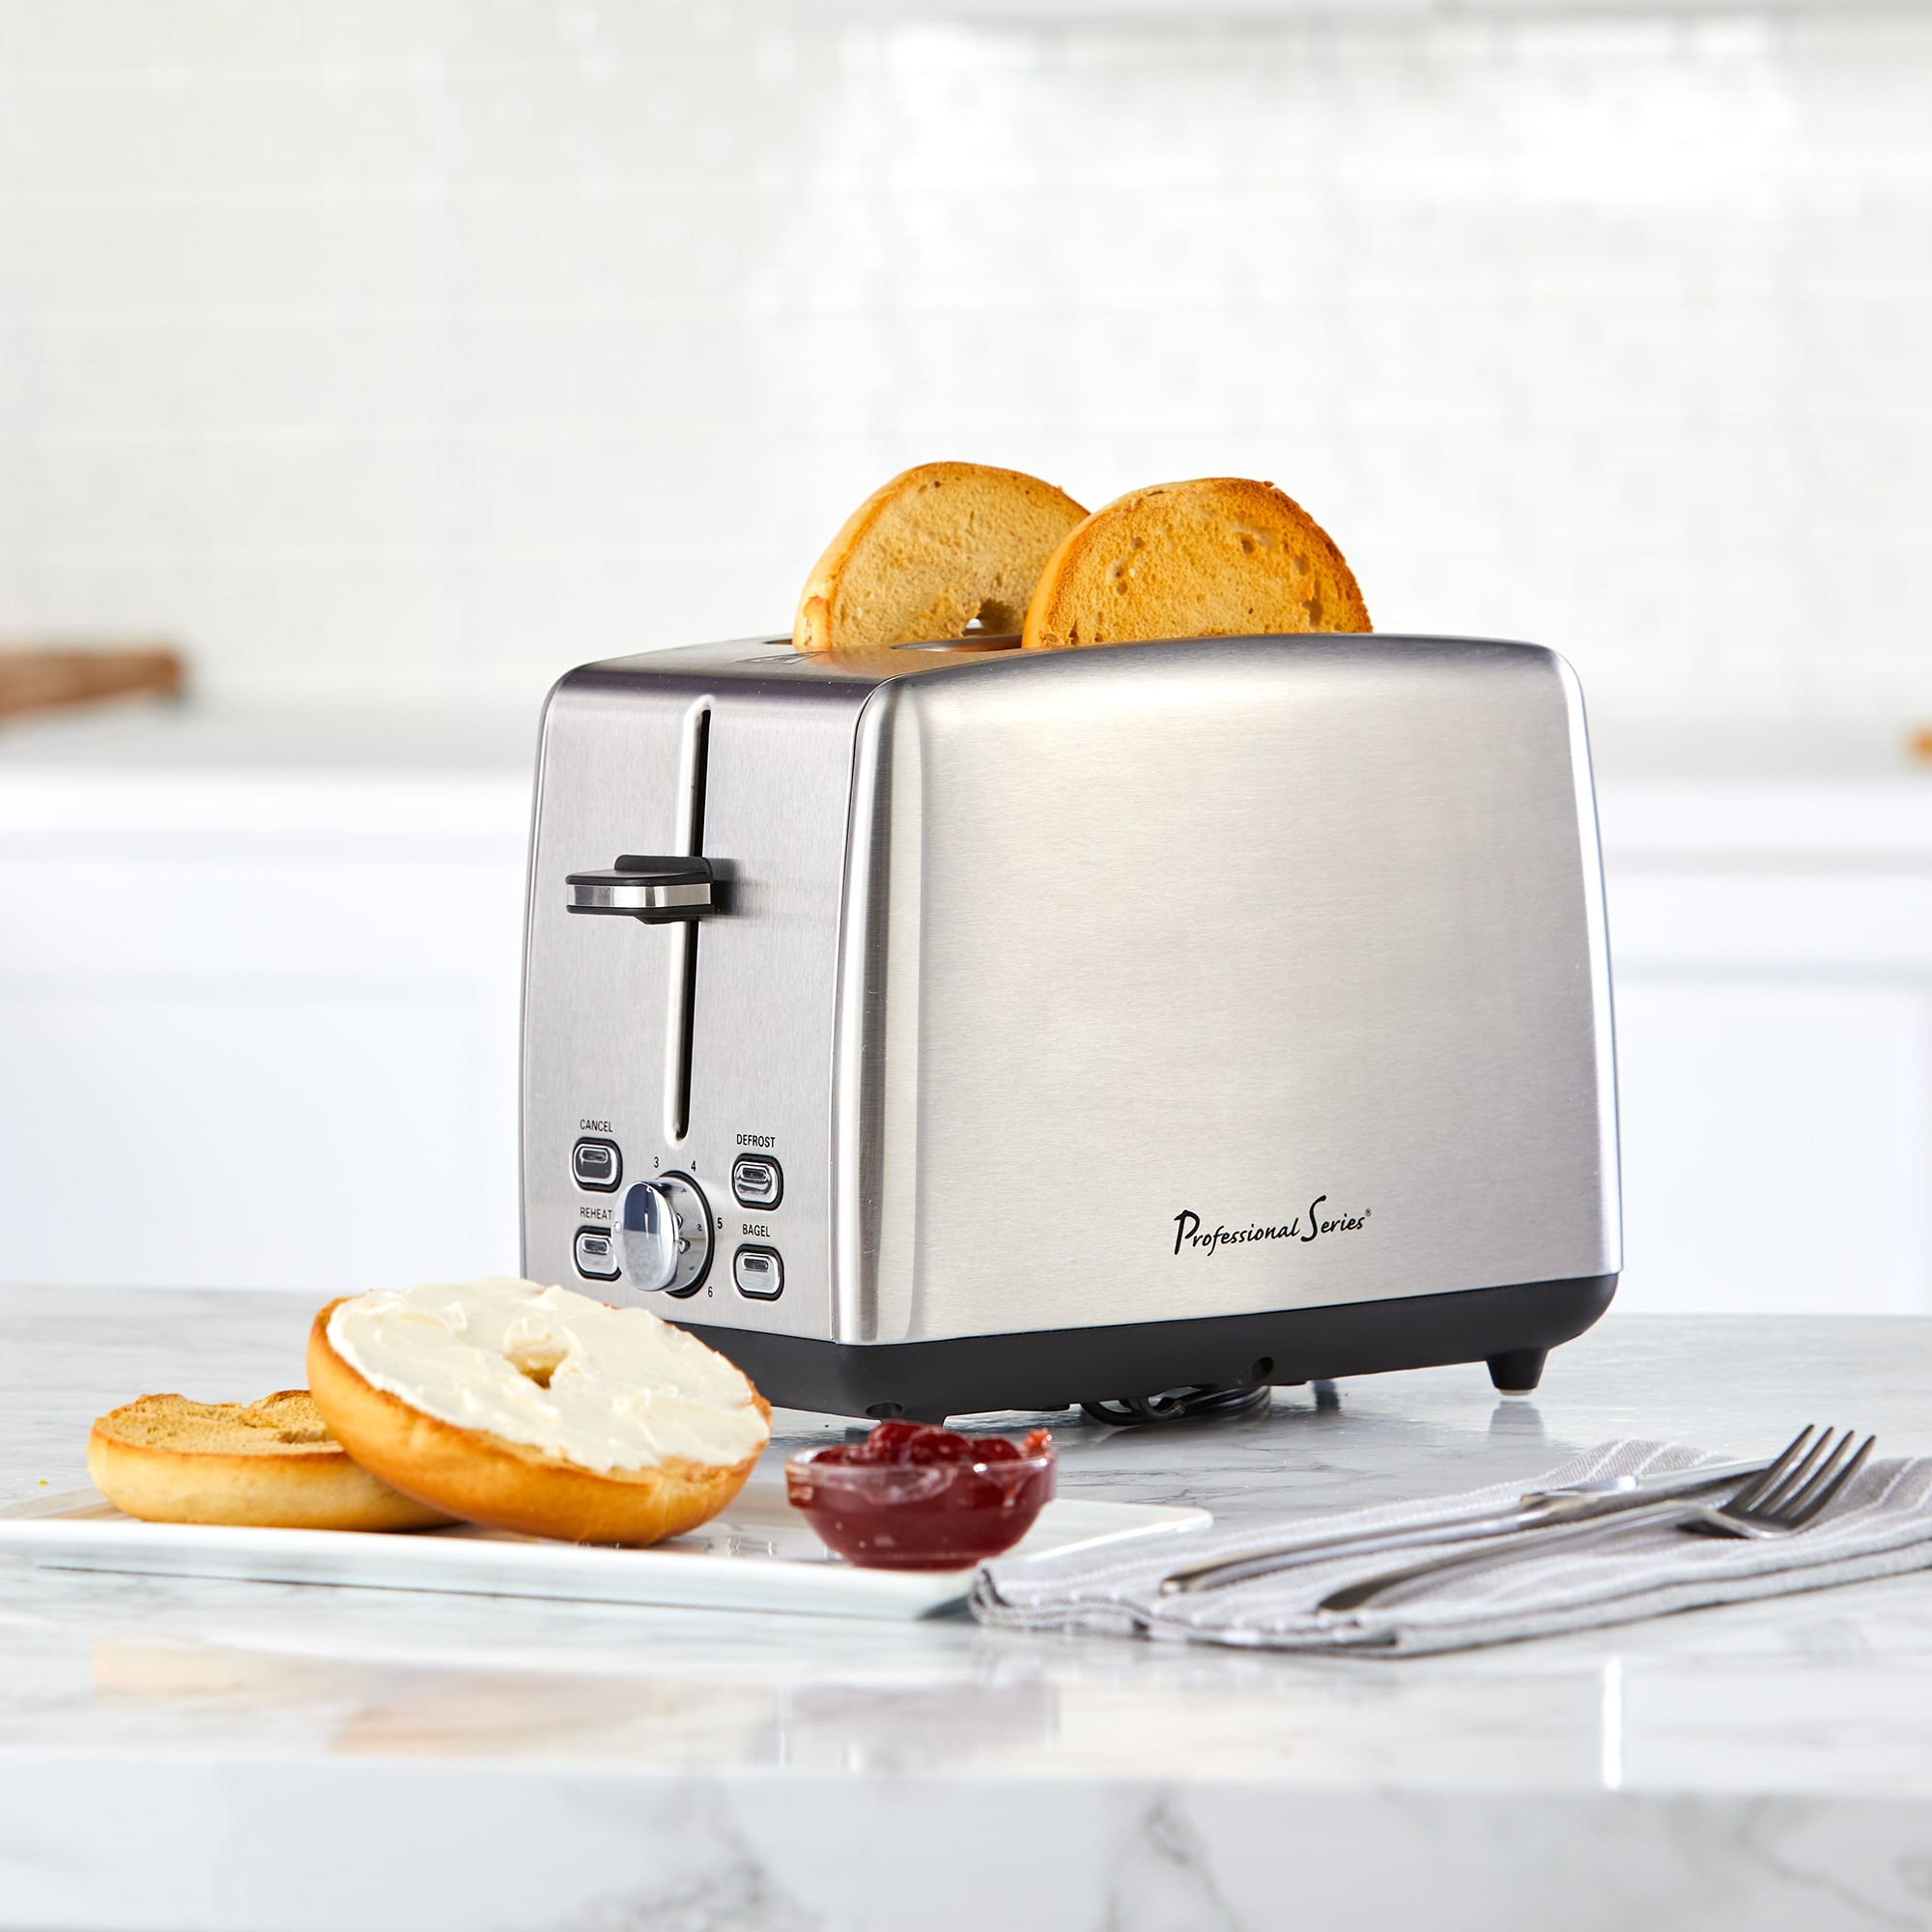 OXO On Up to You 2-Slice Toaster - Loft410